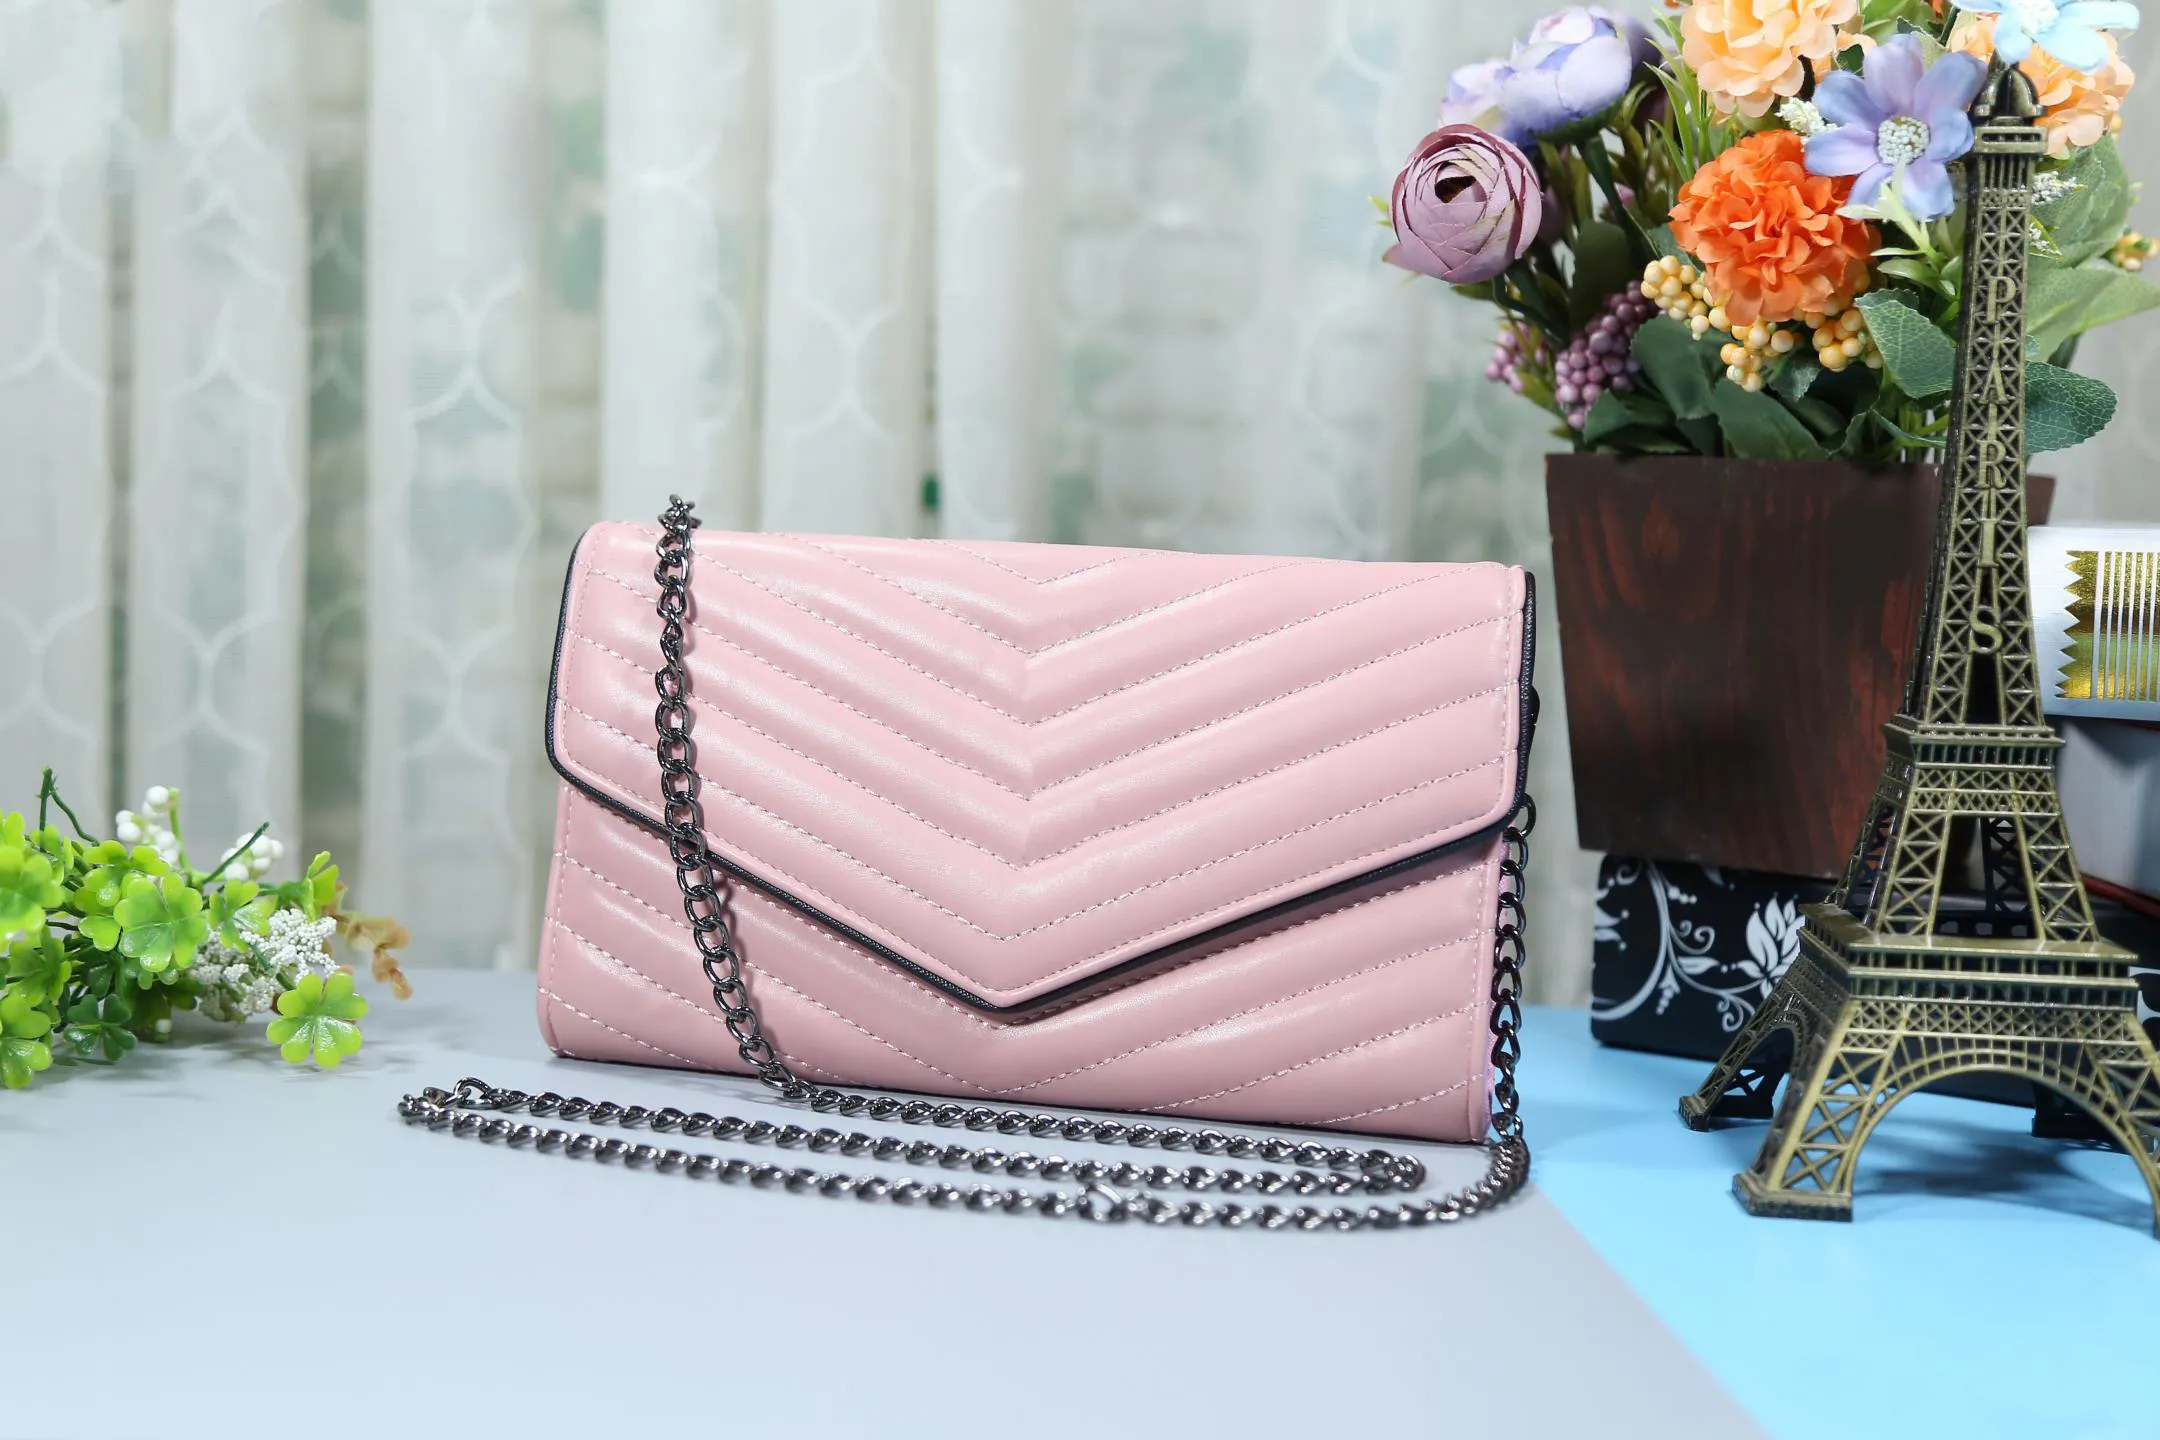 Luxury Designer Gold Chain Shoulder Bag For Women Classic Chain Flap  Crossbody Handbag With Wallet, Clutch Purse, And Top Quality Fashion  Accessory From Footpatrolsk, $53.77 | DHgate.Com